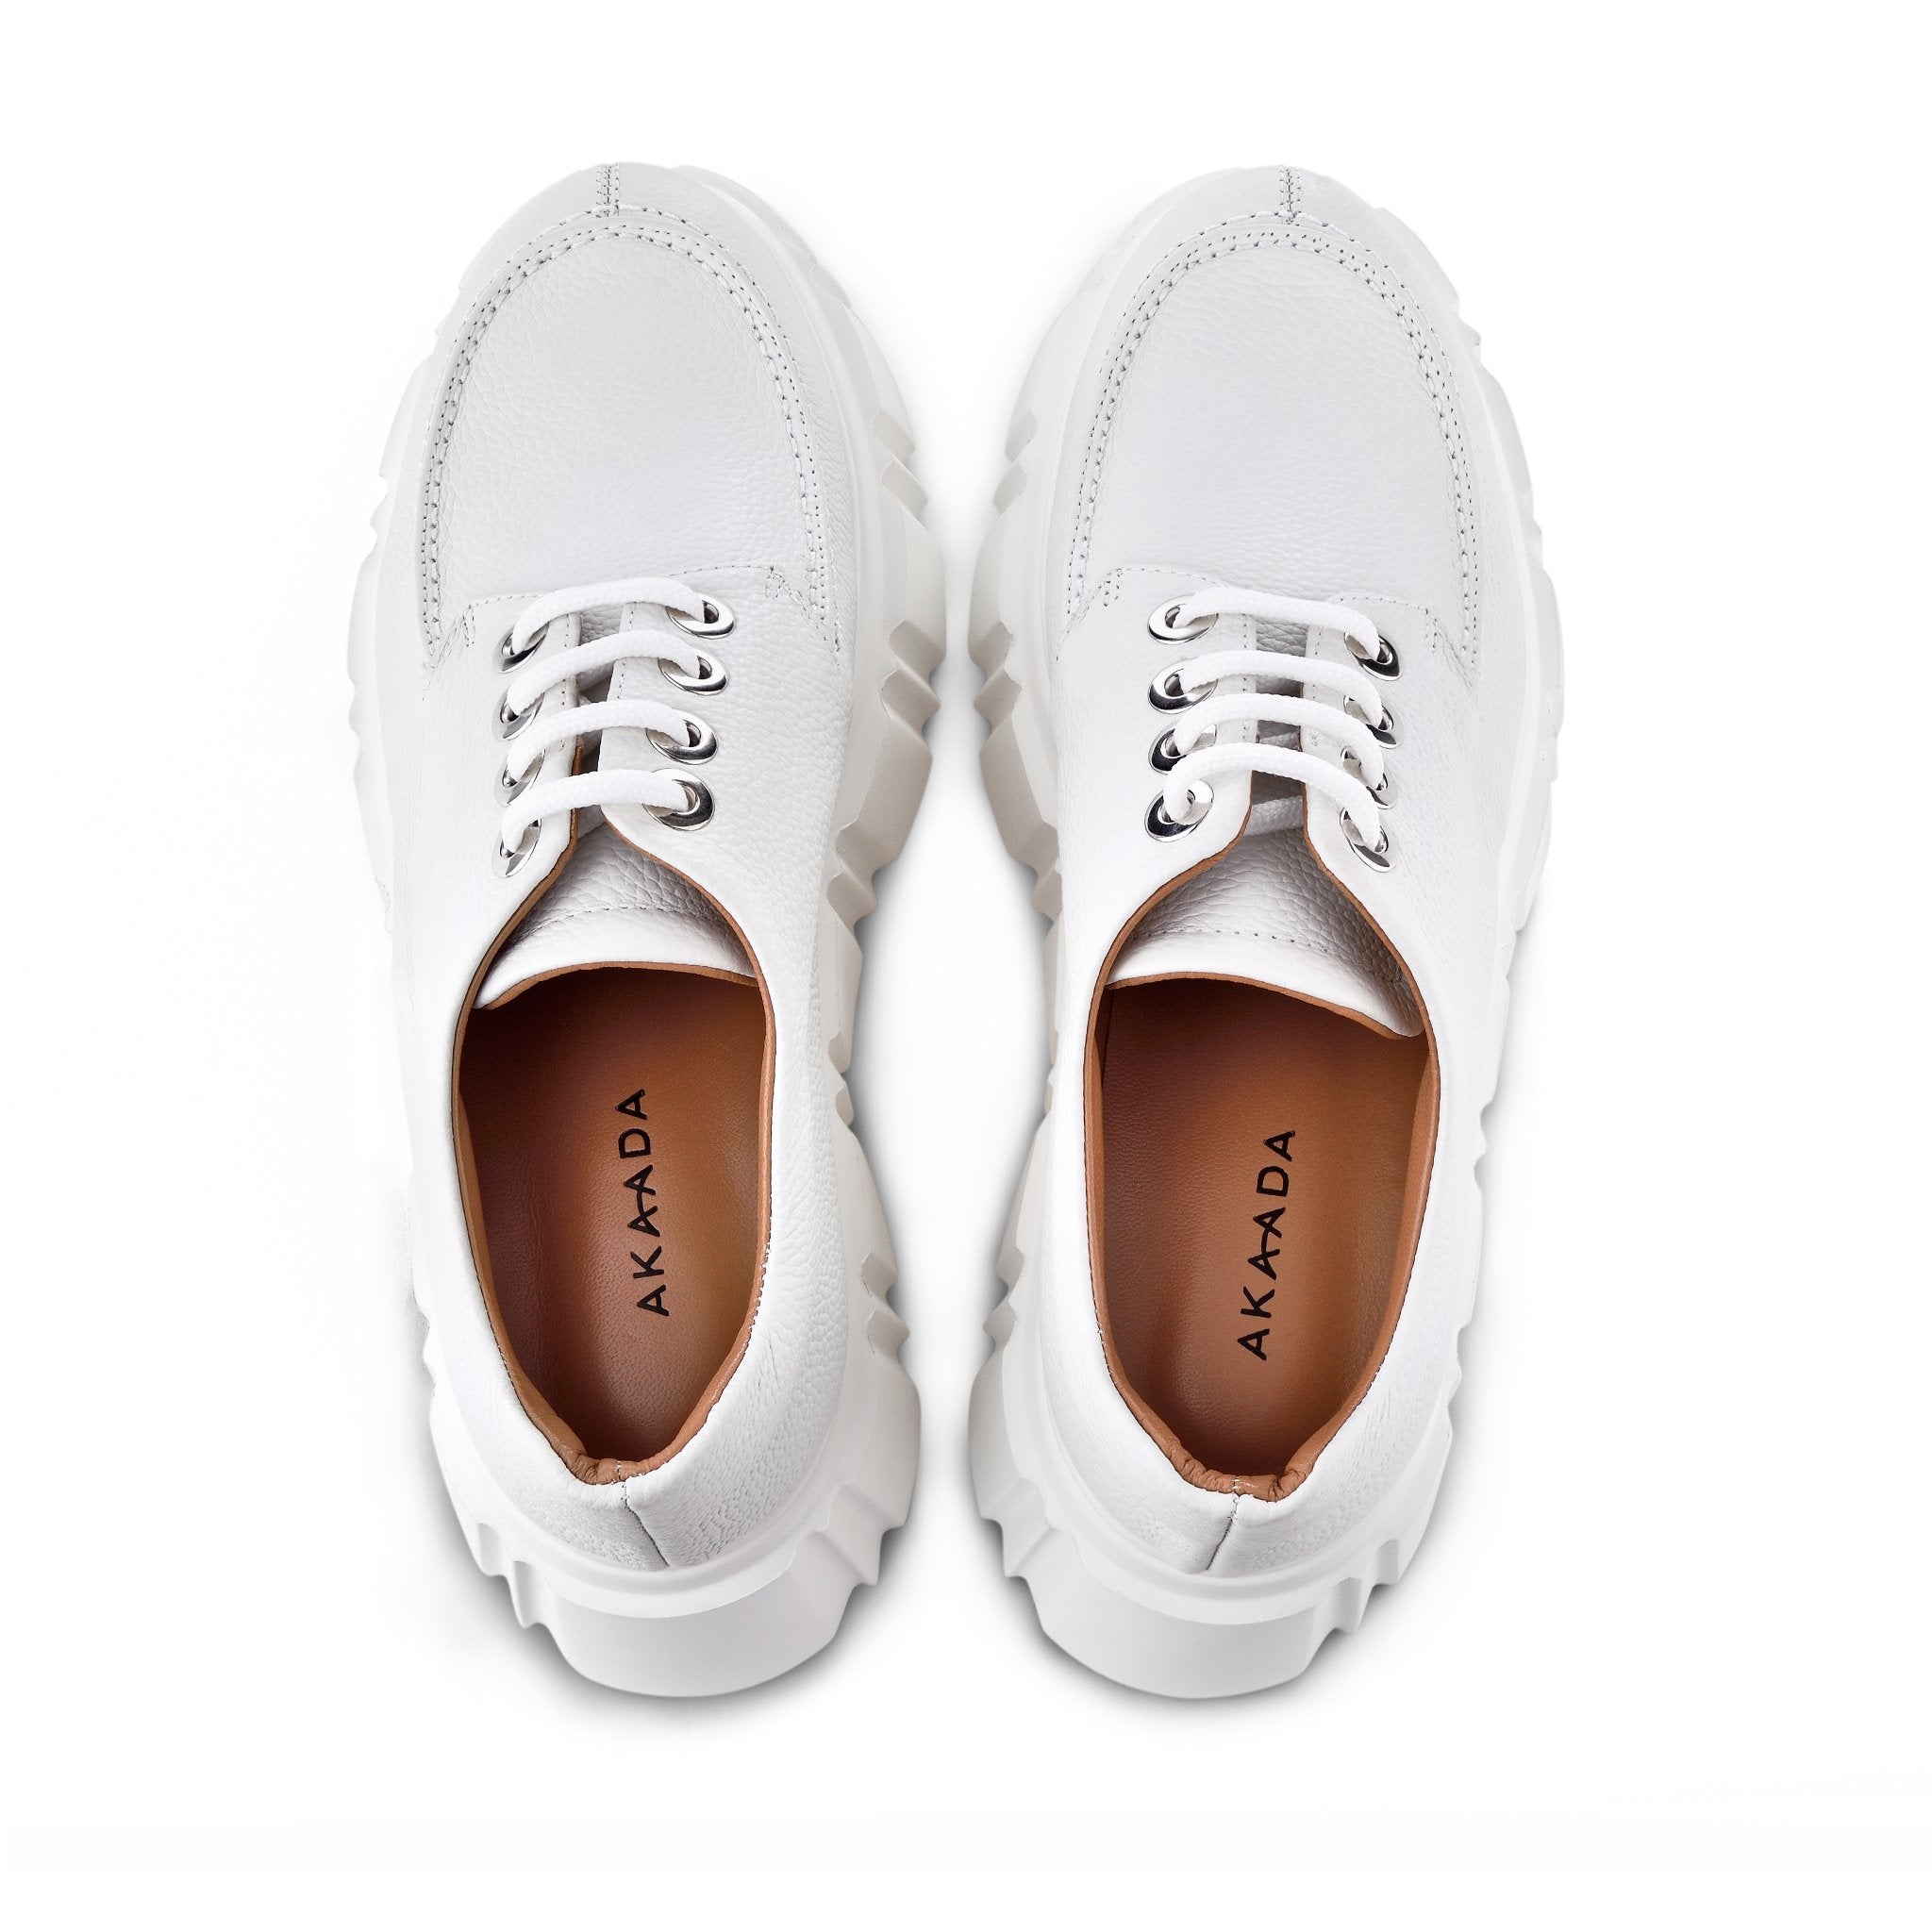 Jun Off White Lace-Up Loafers 2210-02 - 04